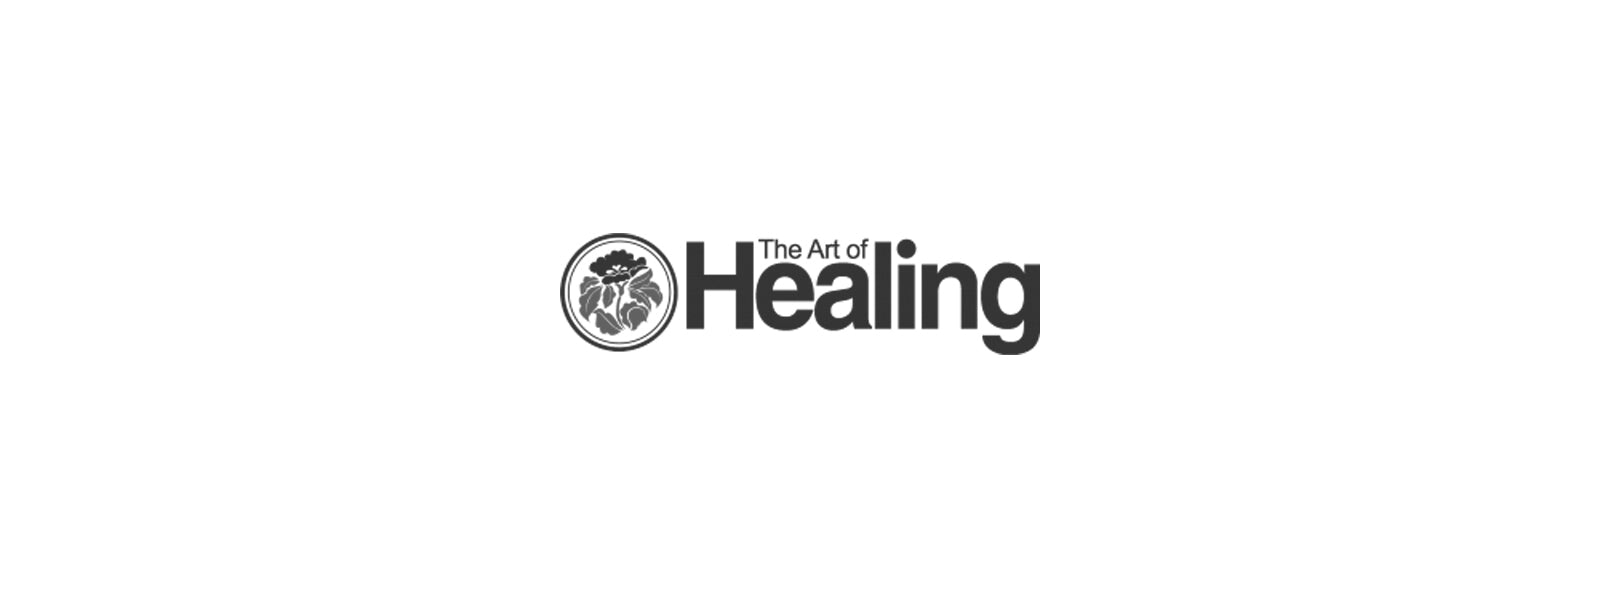 Synthesis and The Art Of Healing Magazine Affiliation